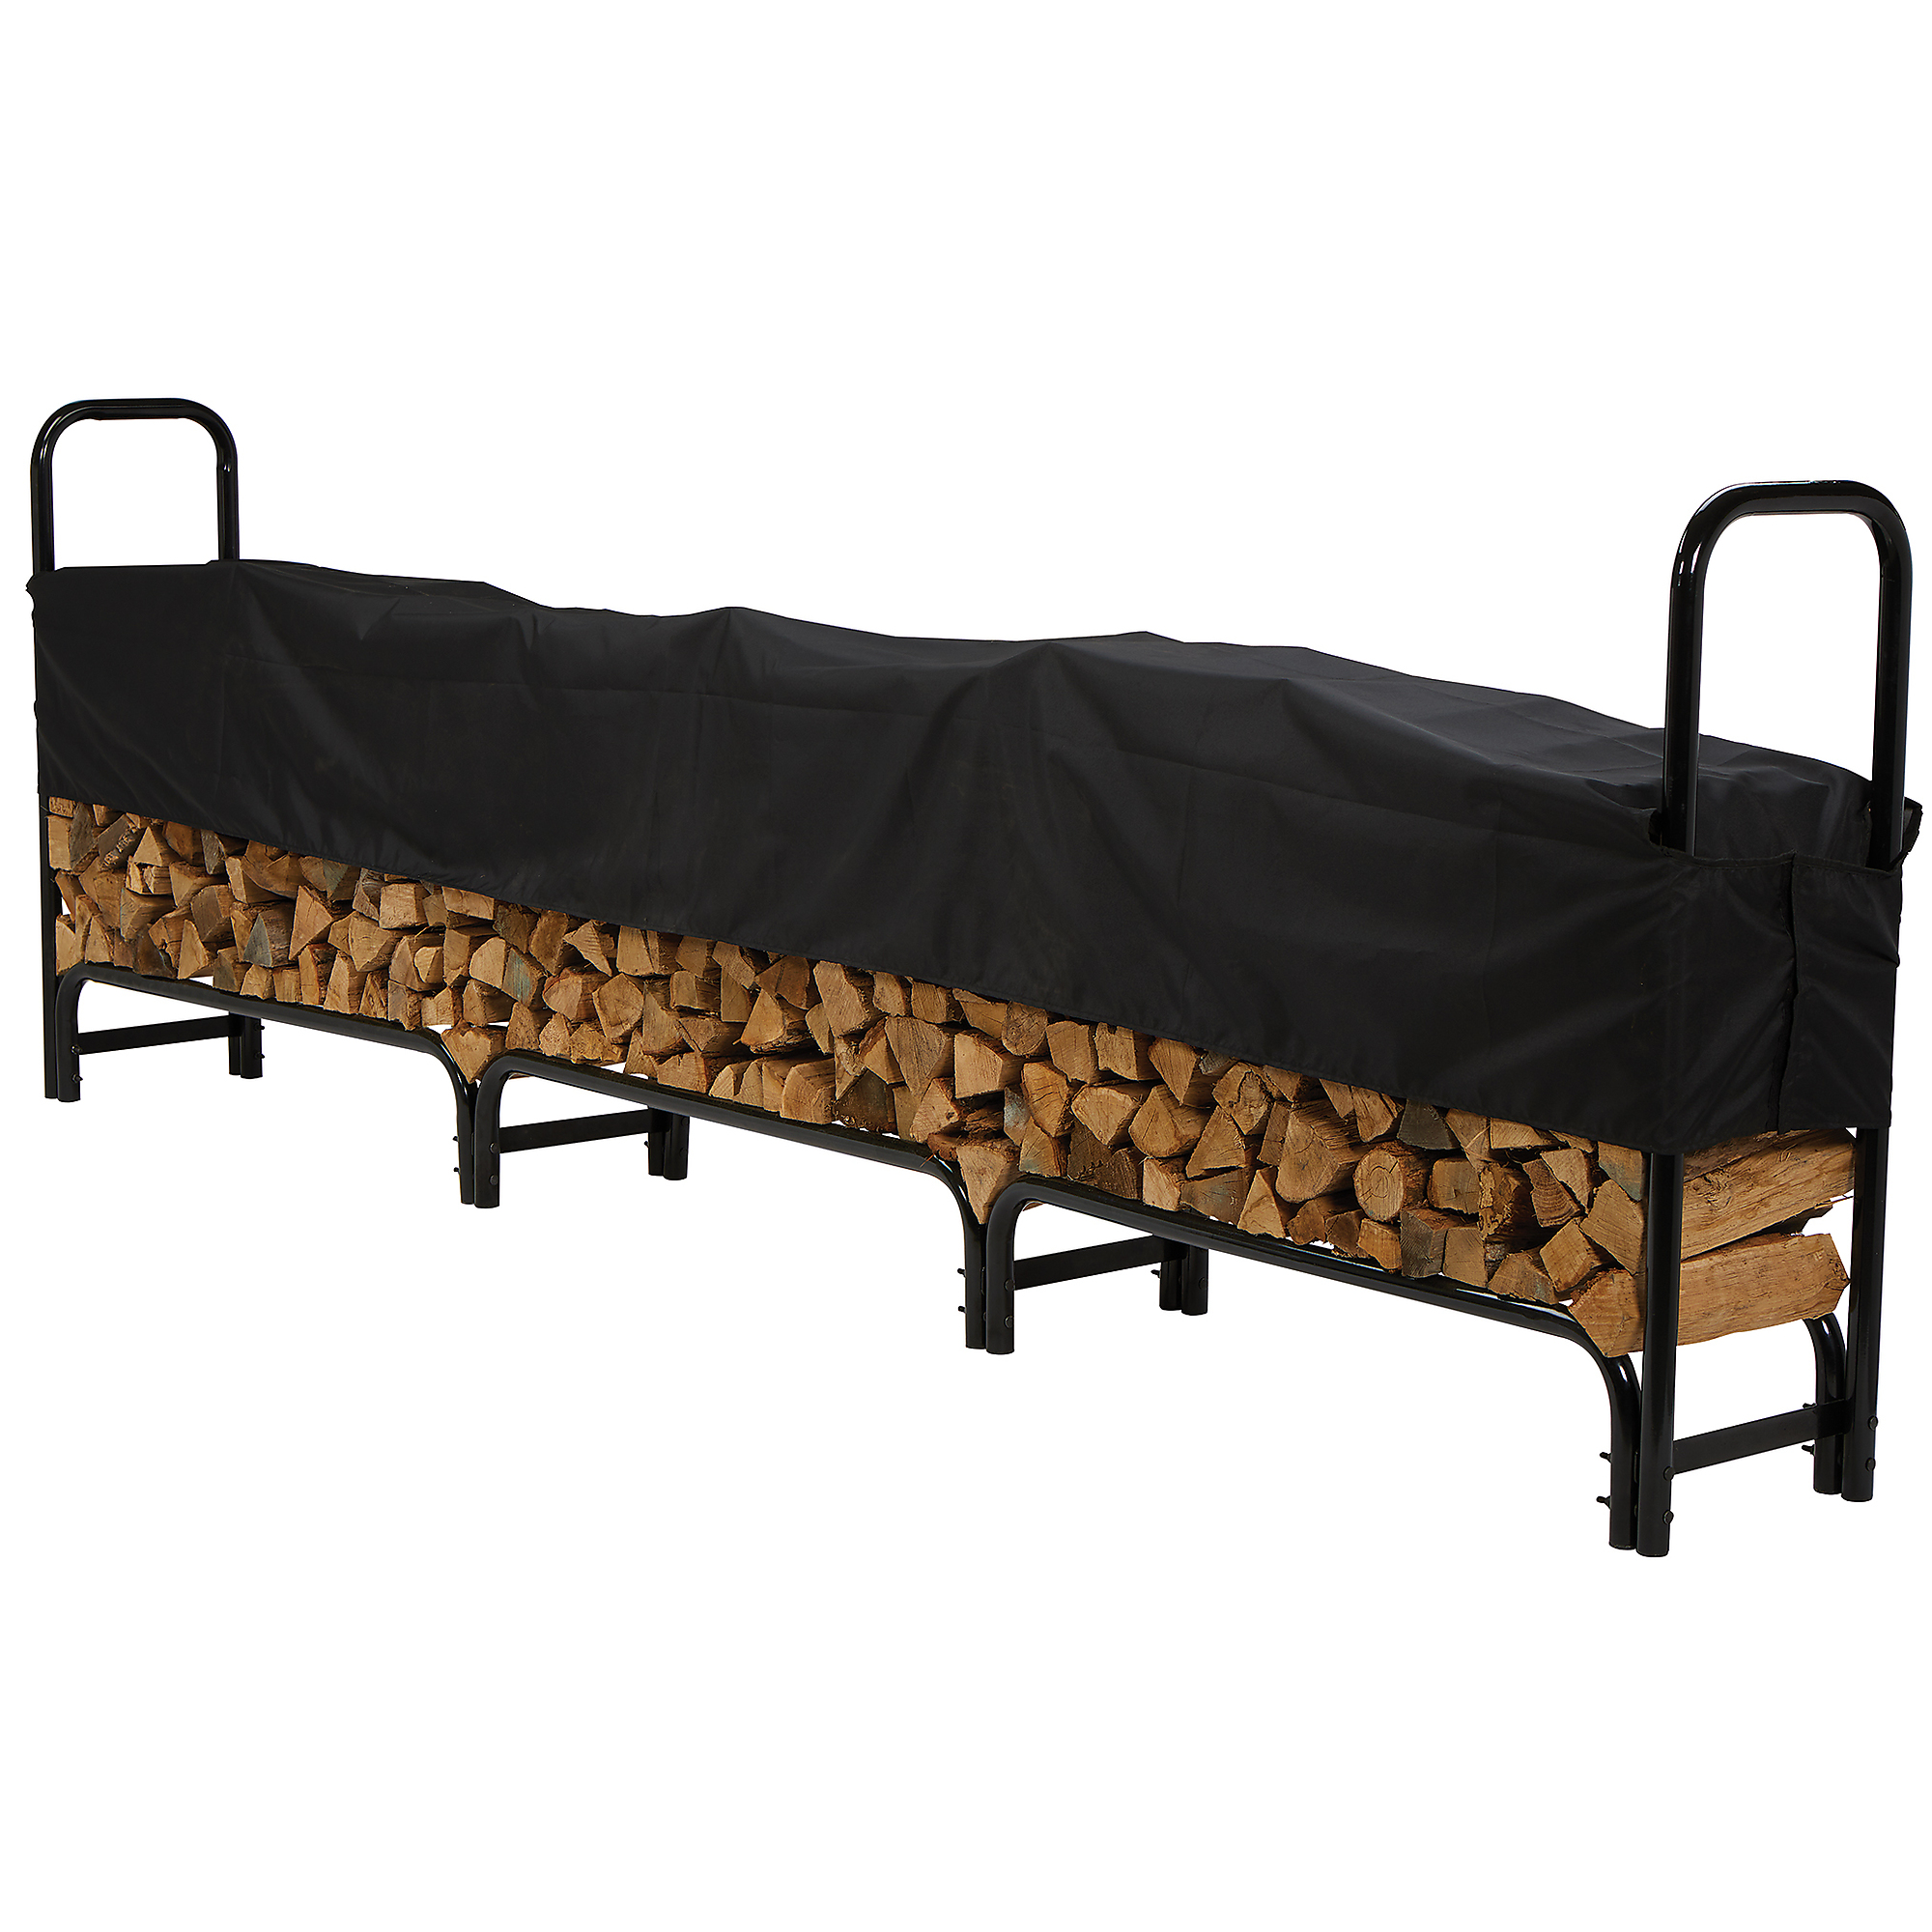 Roughneck 12ft. Firewood Rack with Cover, 3300-lb. Capacity, Steel Construction, Model 73202212